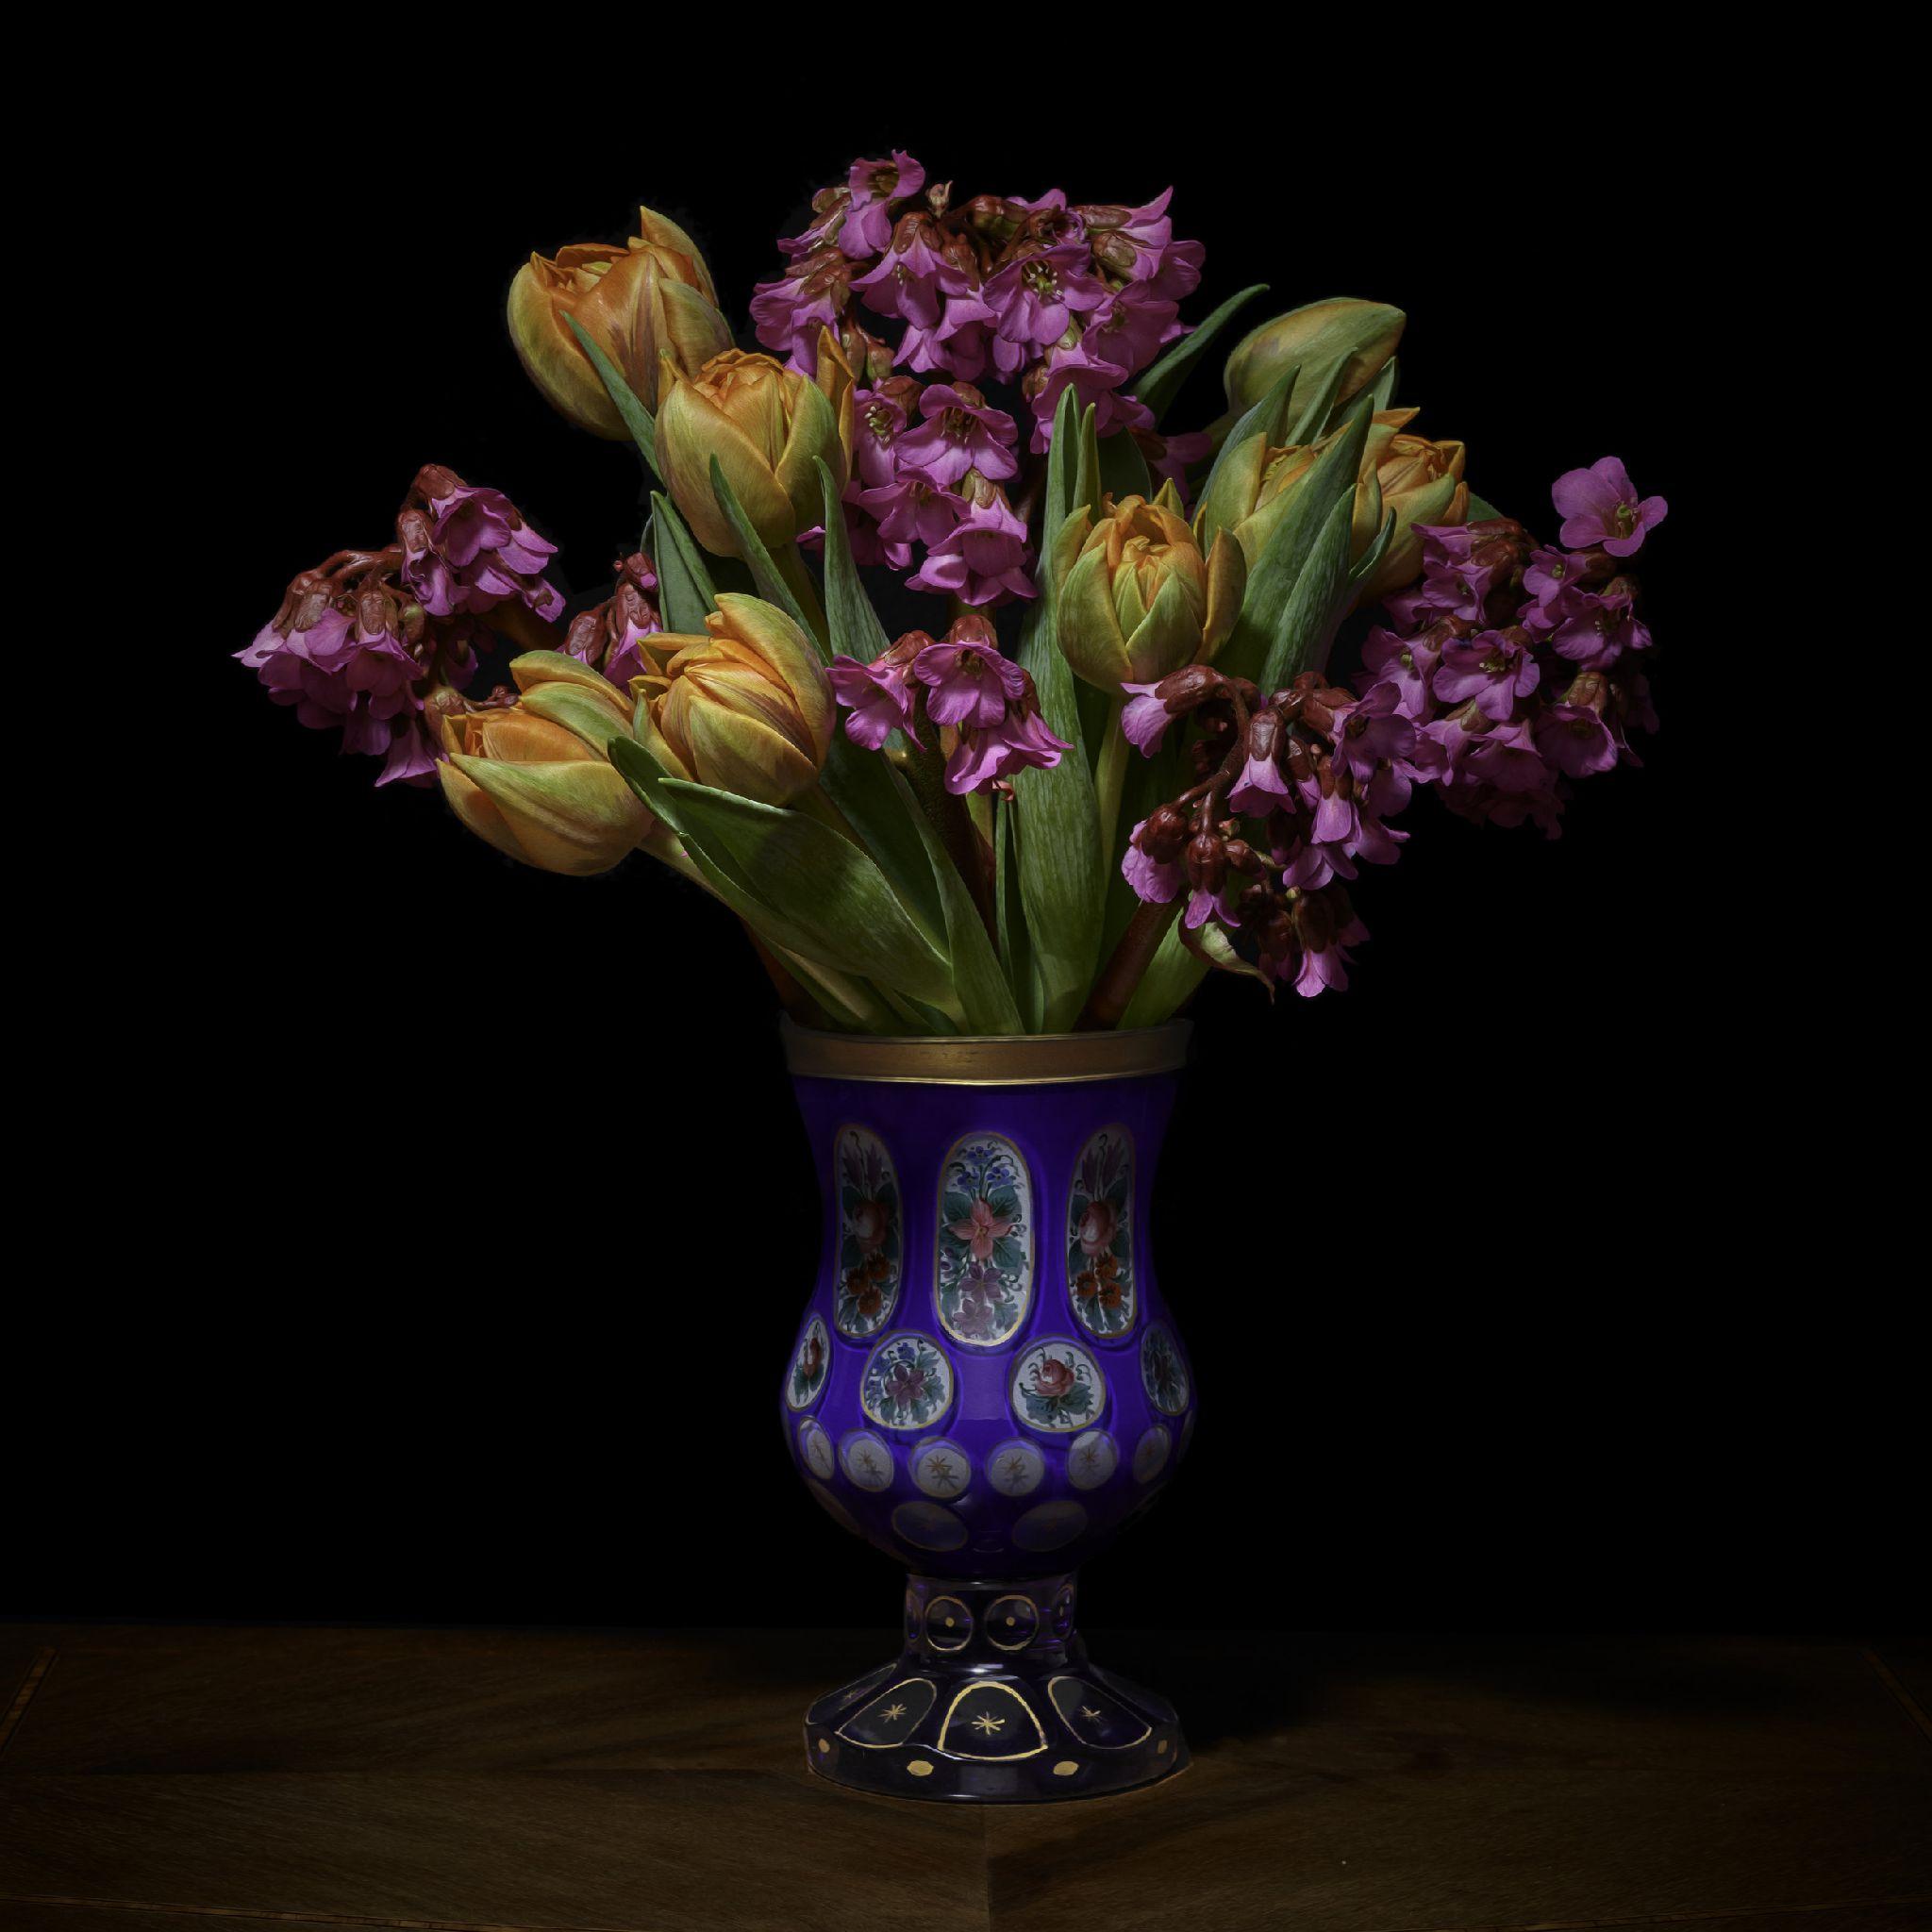 Azaleas and Tulips in a European Vessel - Photograph by T.M. Glass